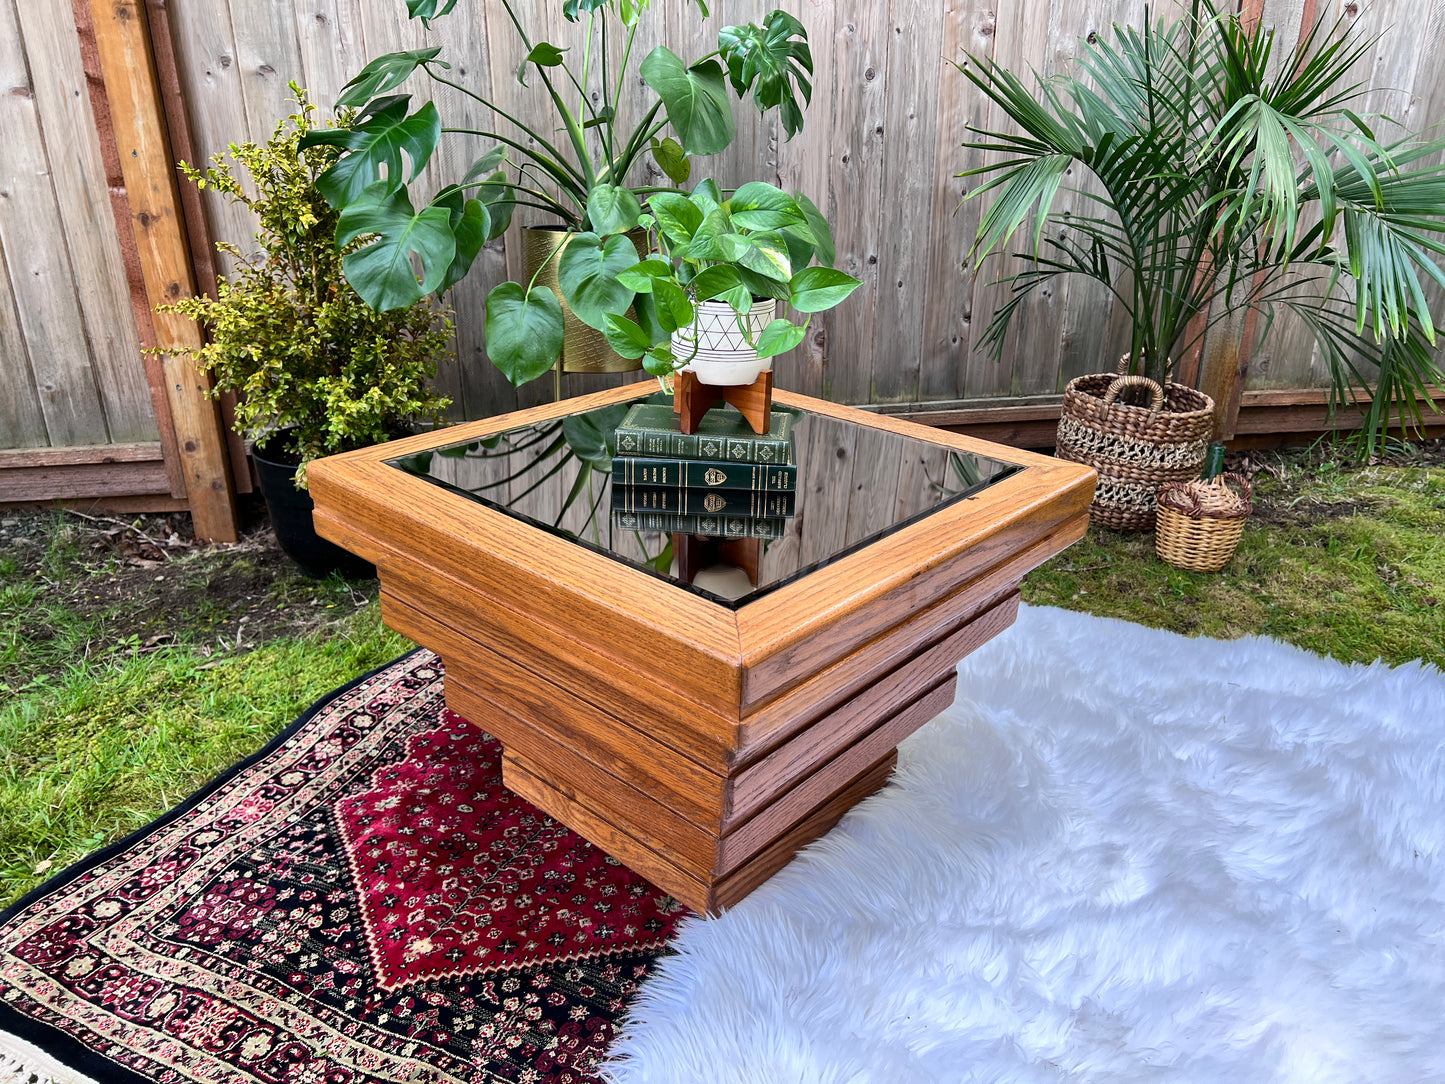 The Pyramid Coffee Table